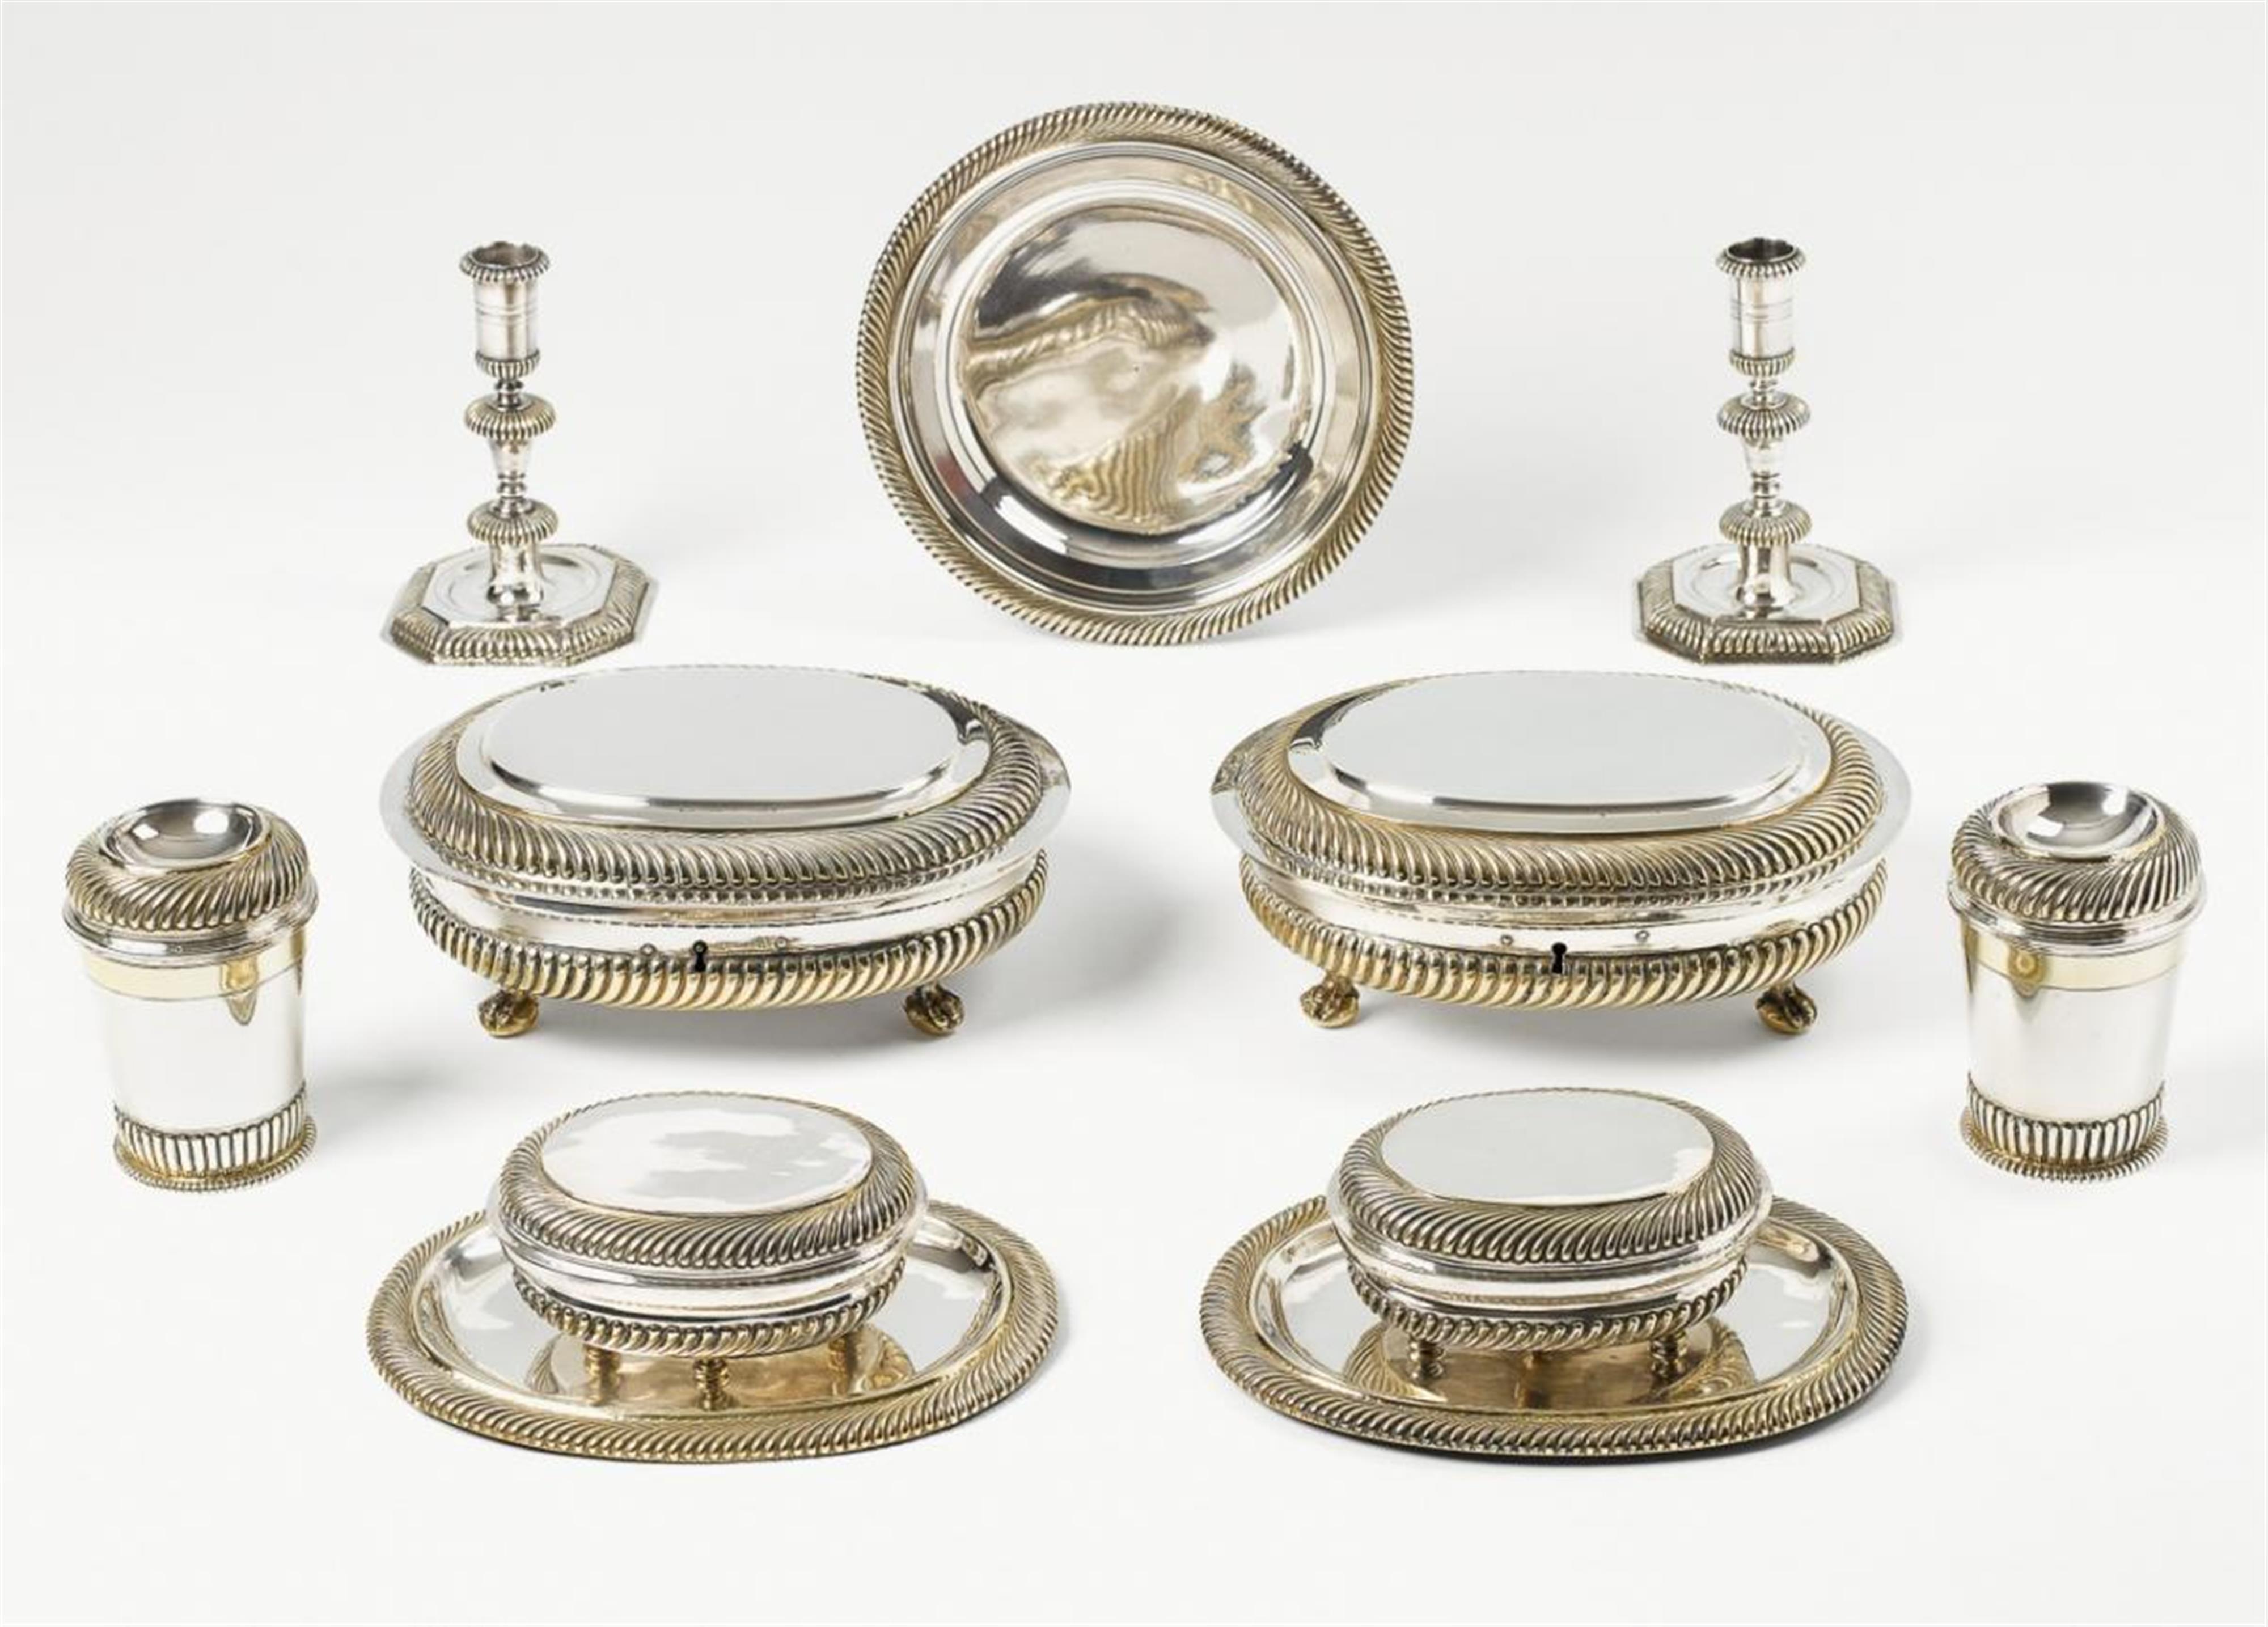 An Augsburg silver partially gilt travel service. Comprising two boxes with presentoires, two locking boxes (one with key), a pair of candlesticks, a pair of lidded beakers and a plate. Marks of Christian Winter and Georg Friebel, 1699 - 1703. - image-1